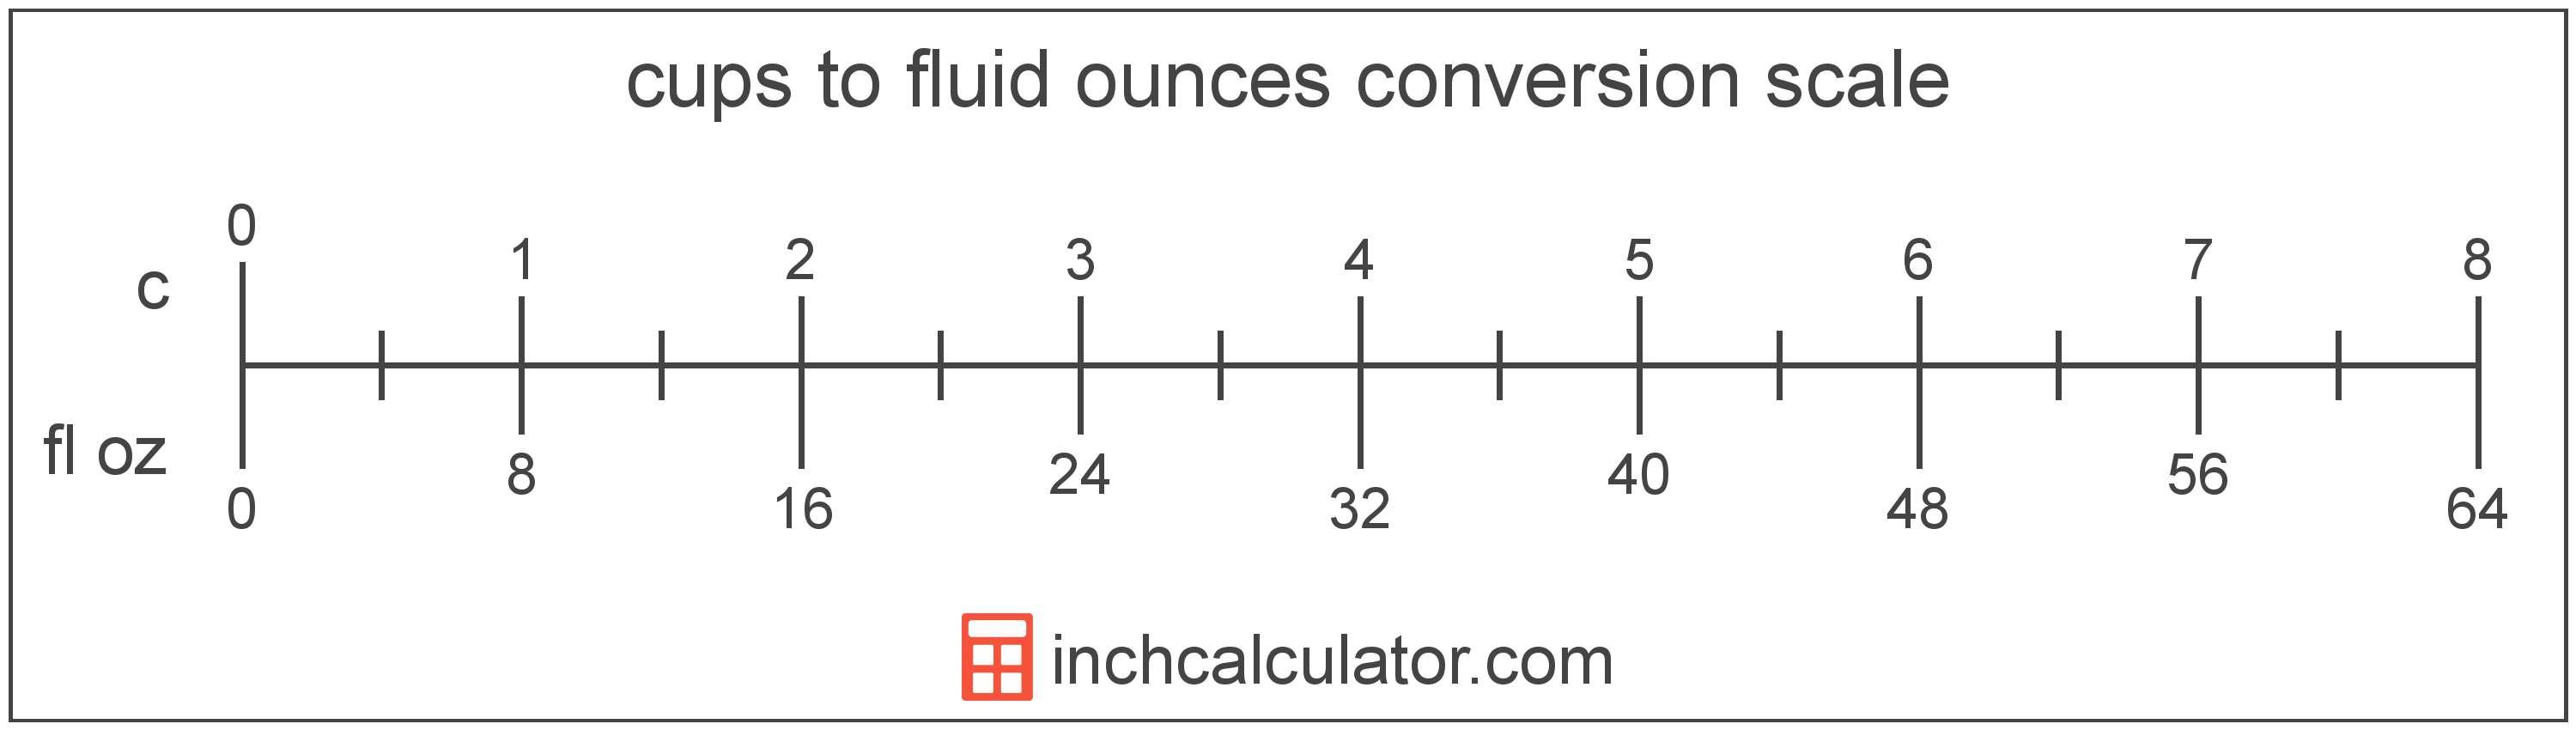 Cups to Fluid Ounces Conversion (c to fl oz) - Inch Calculator